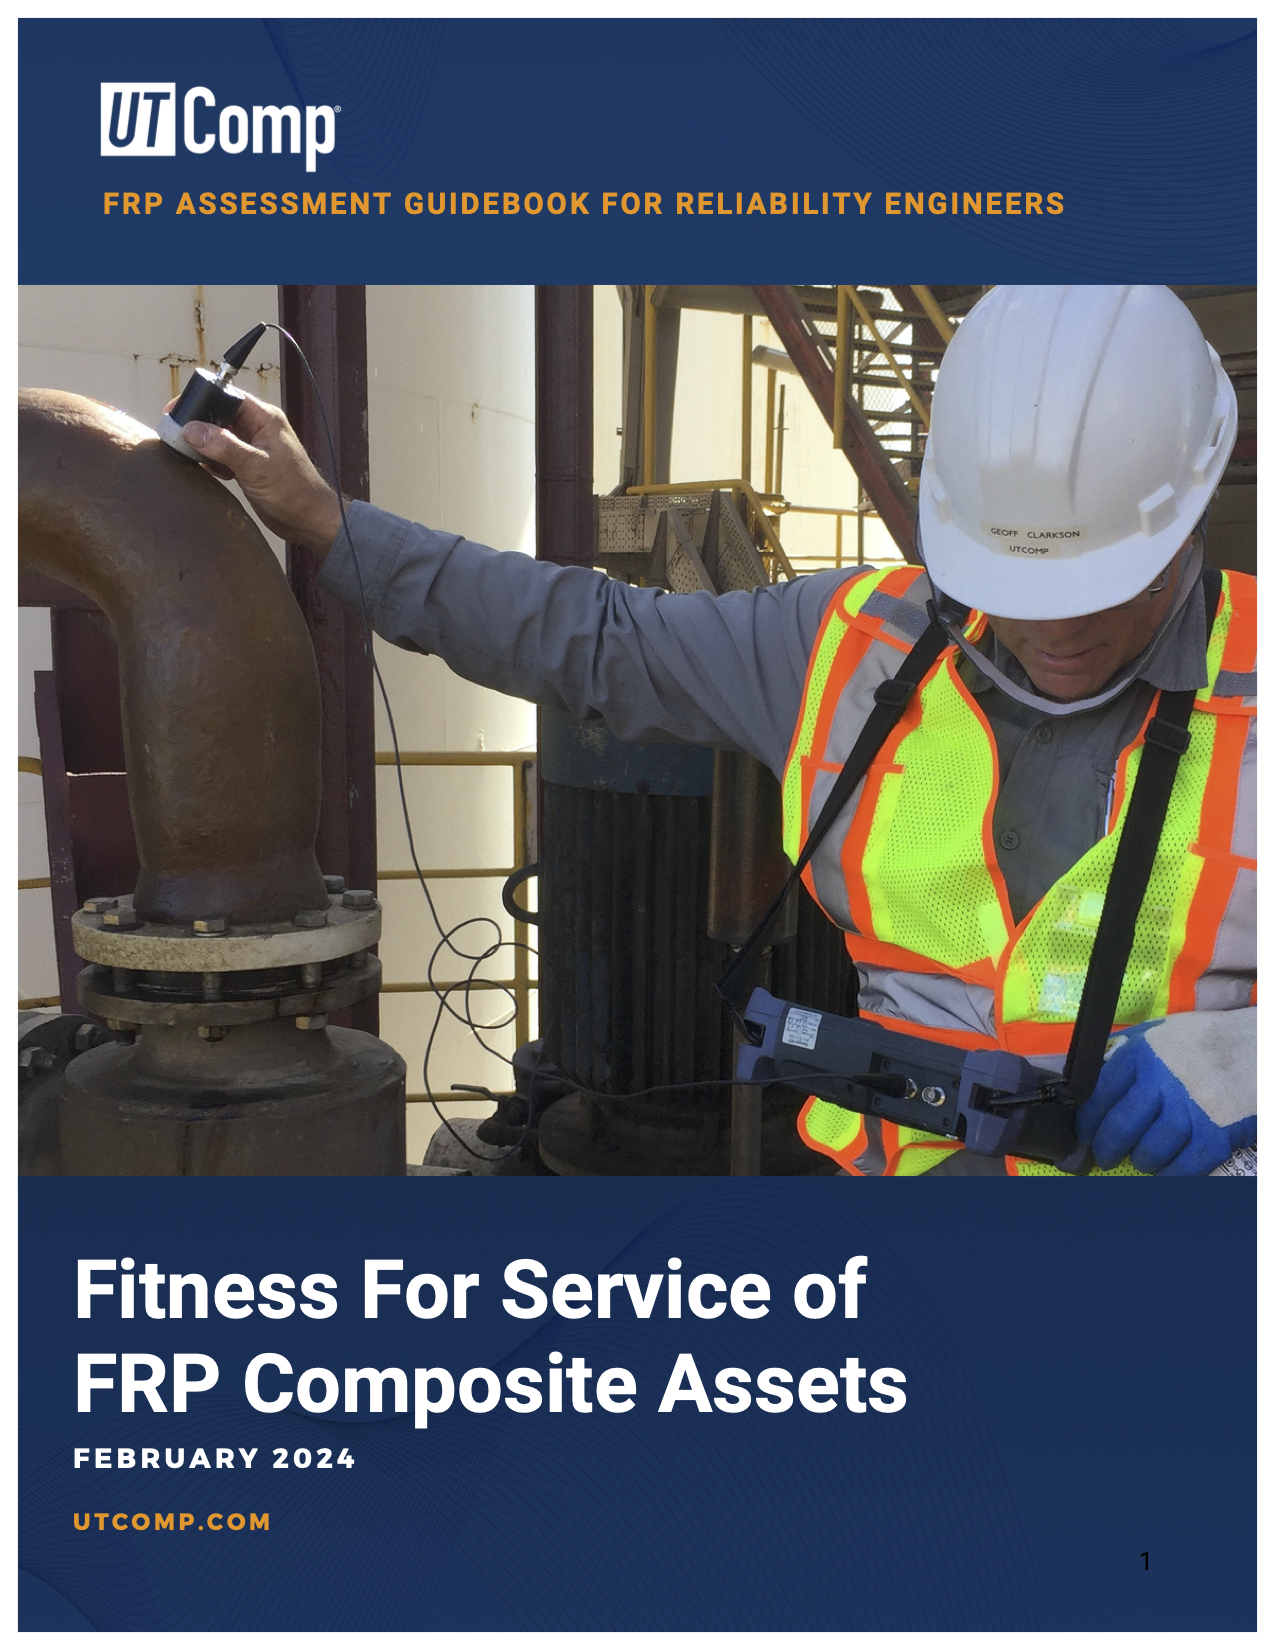 FRP Fitness for Service guidebook cover